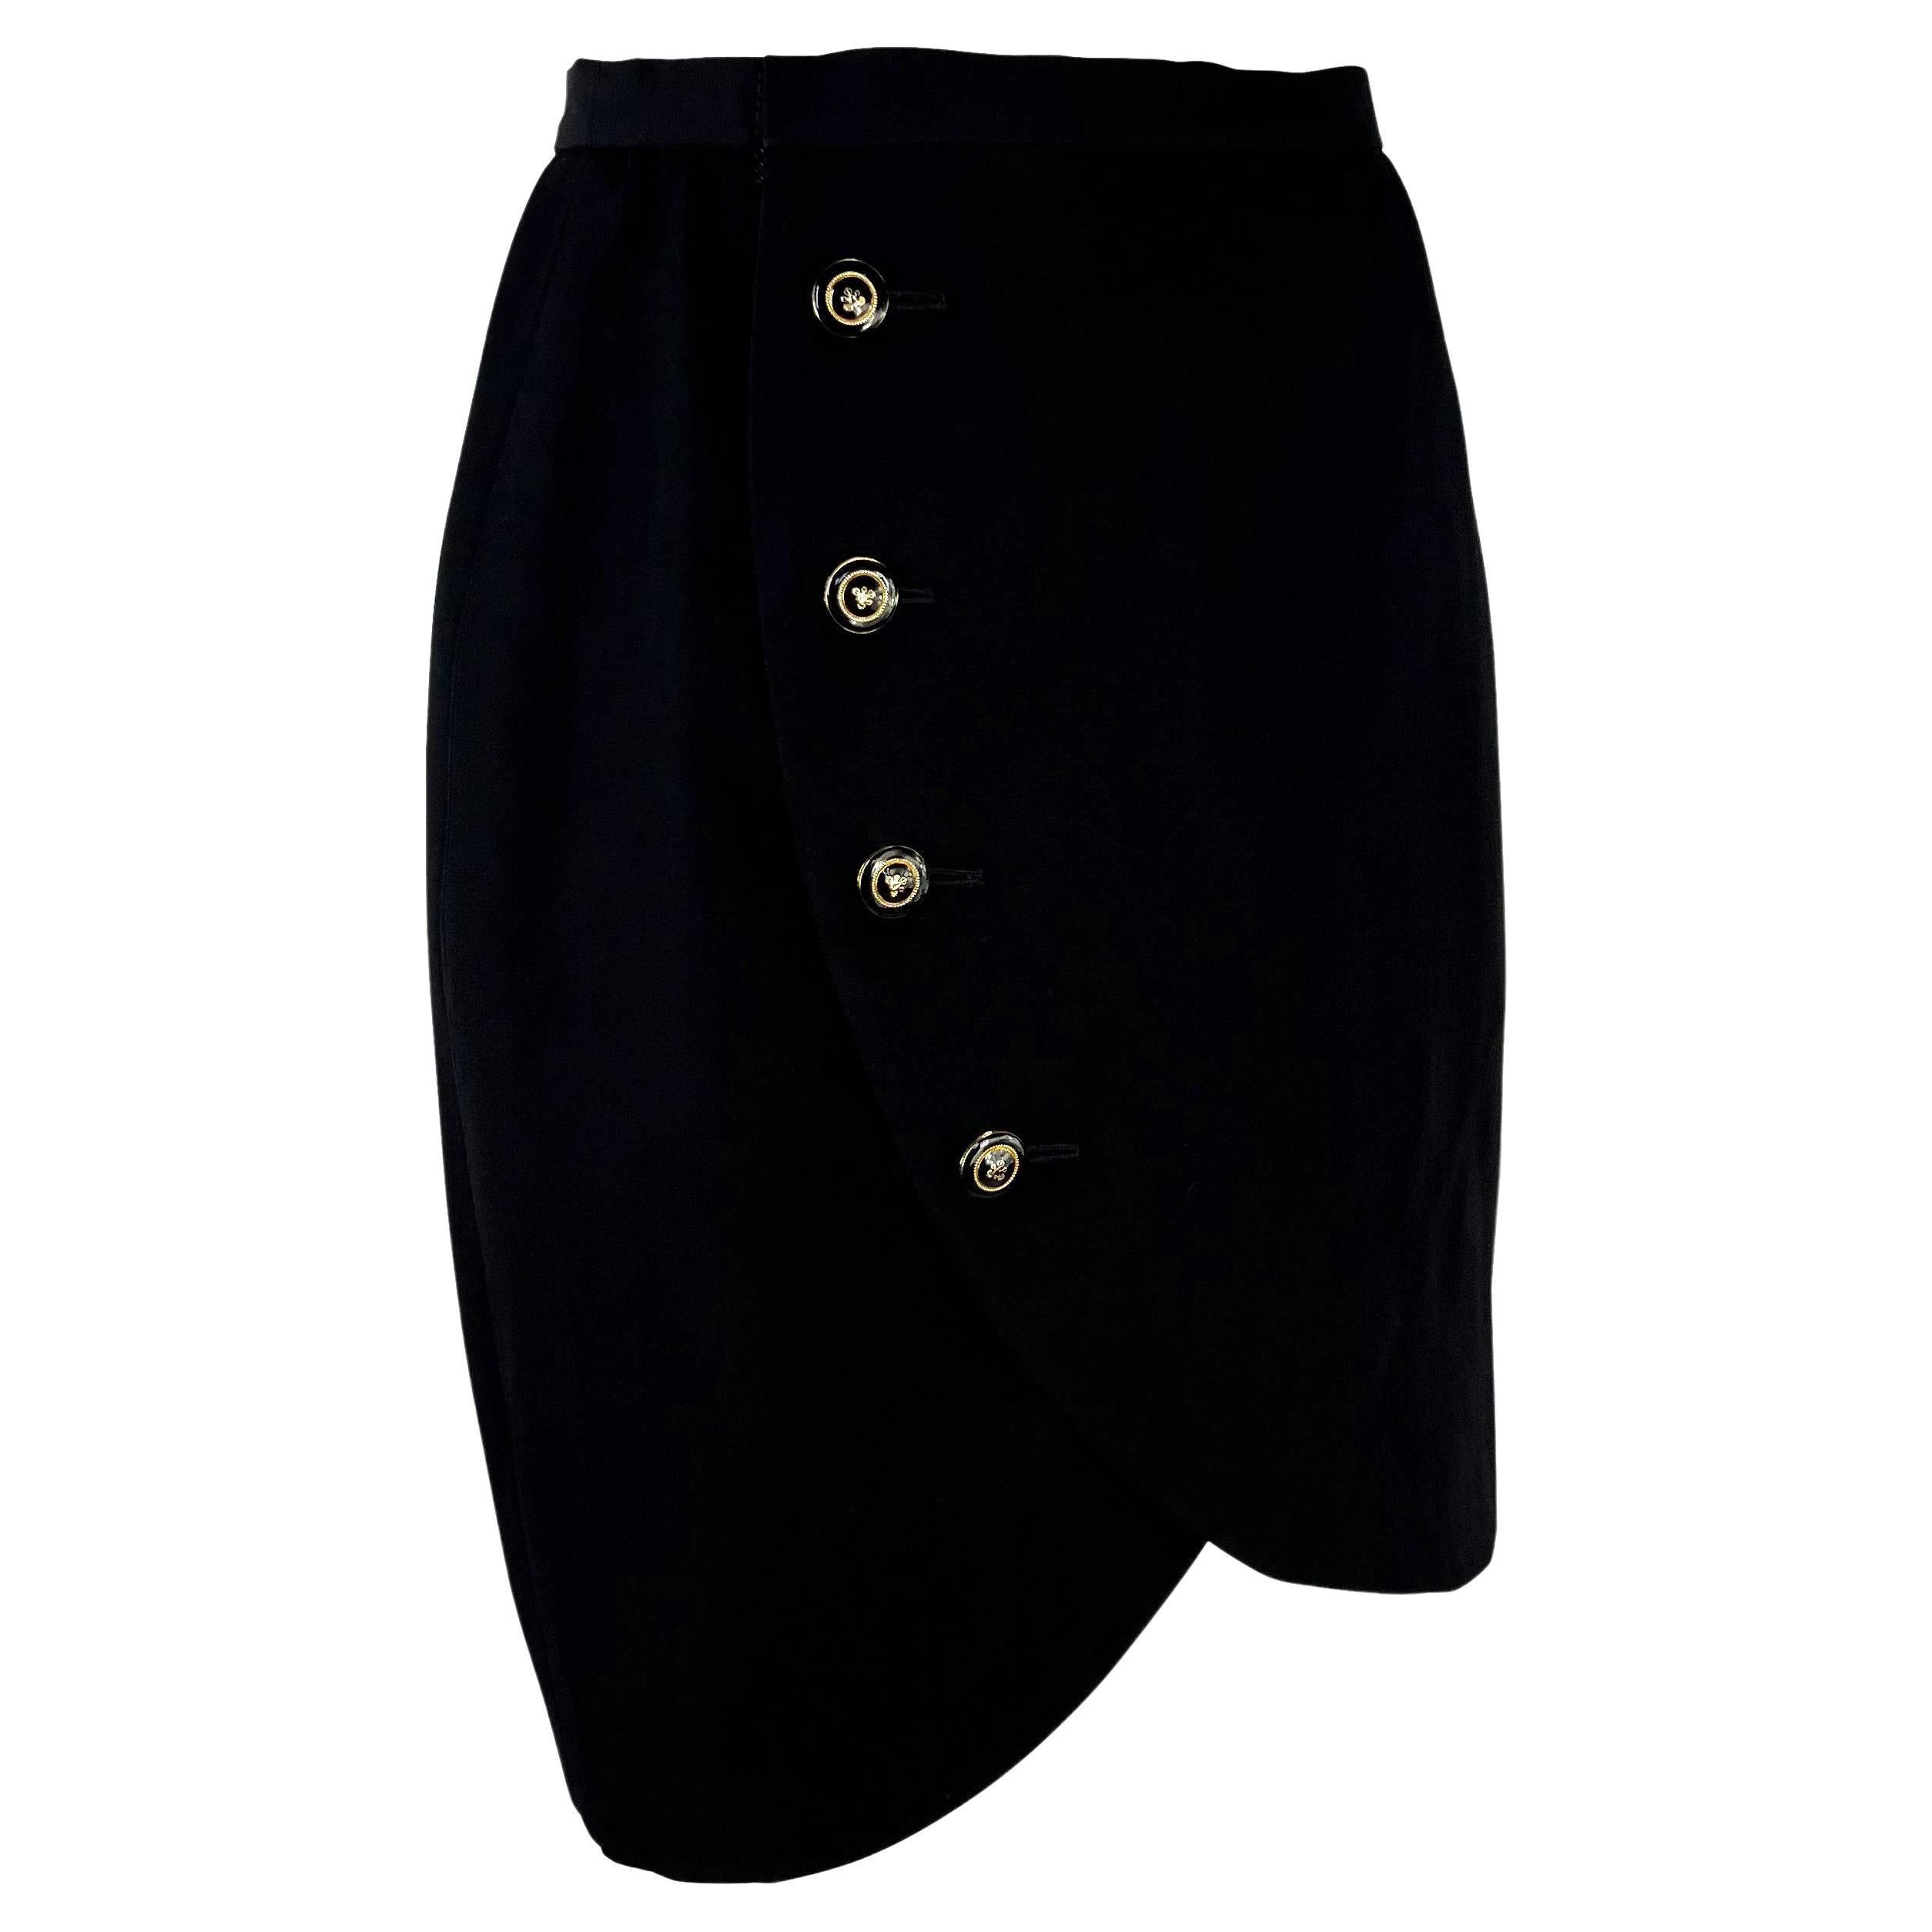 Presenting a black wrap Yves Saint Laurent Rive Gauche skirt, designed by Yves Saint Laurent. From the Spring/Summer 1989, this timeless skirt features a curved cut hem and is made complete with gold-tone and black enamel buttons. 

Approximate